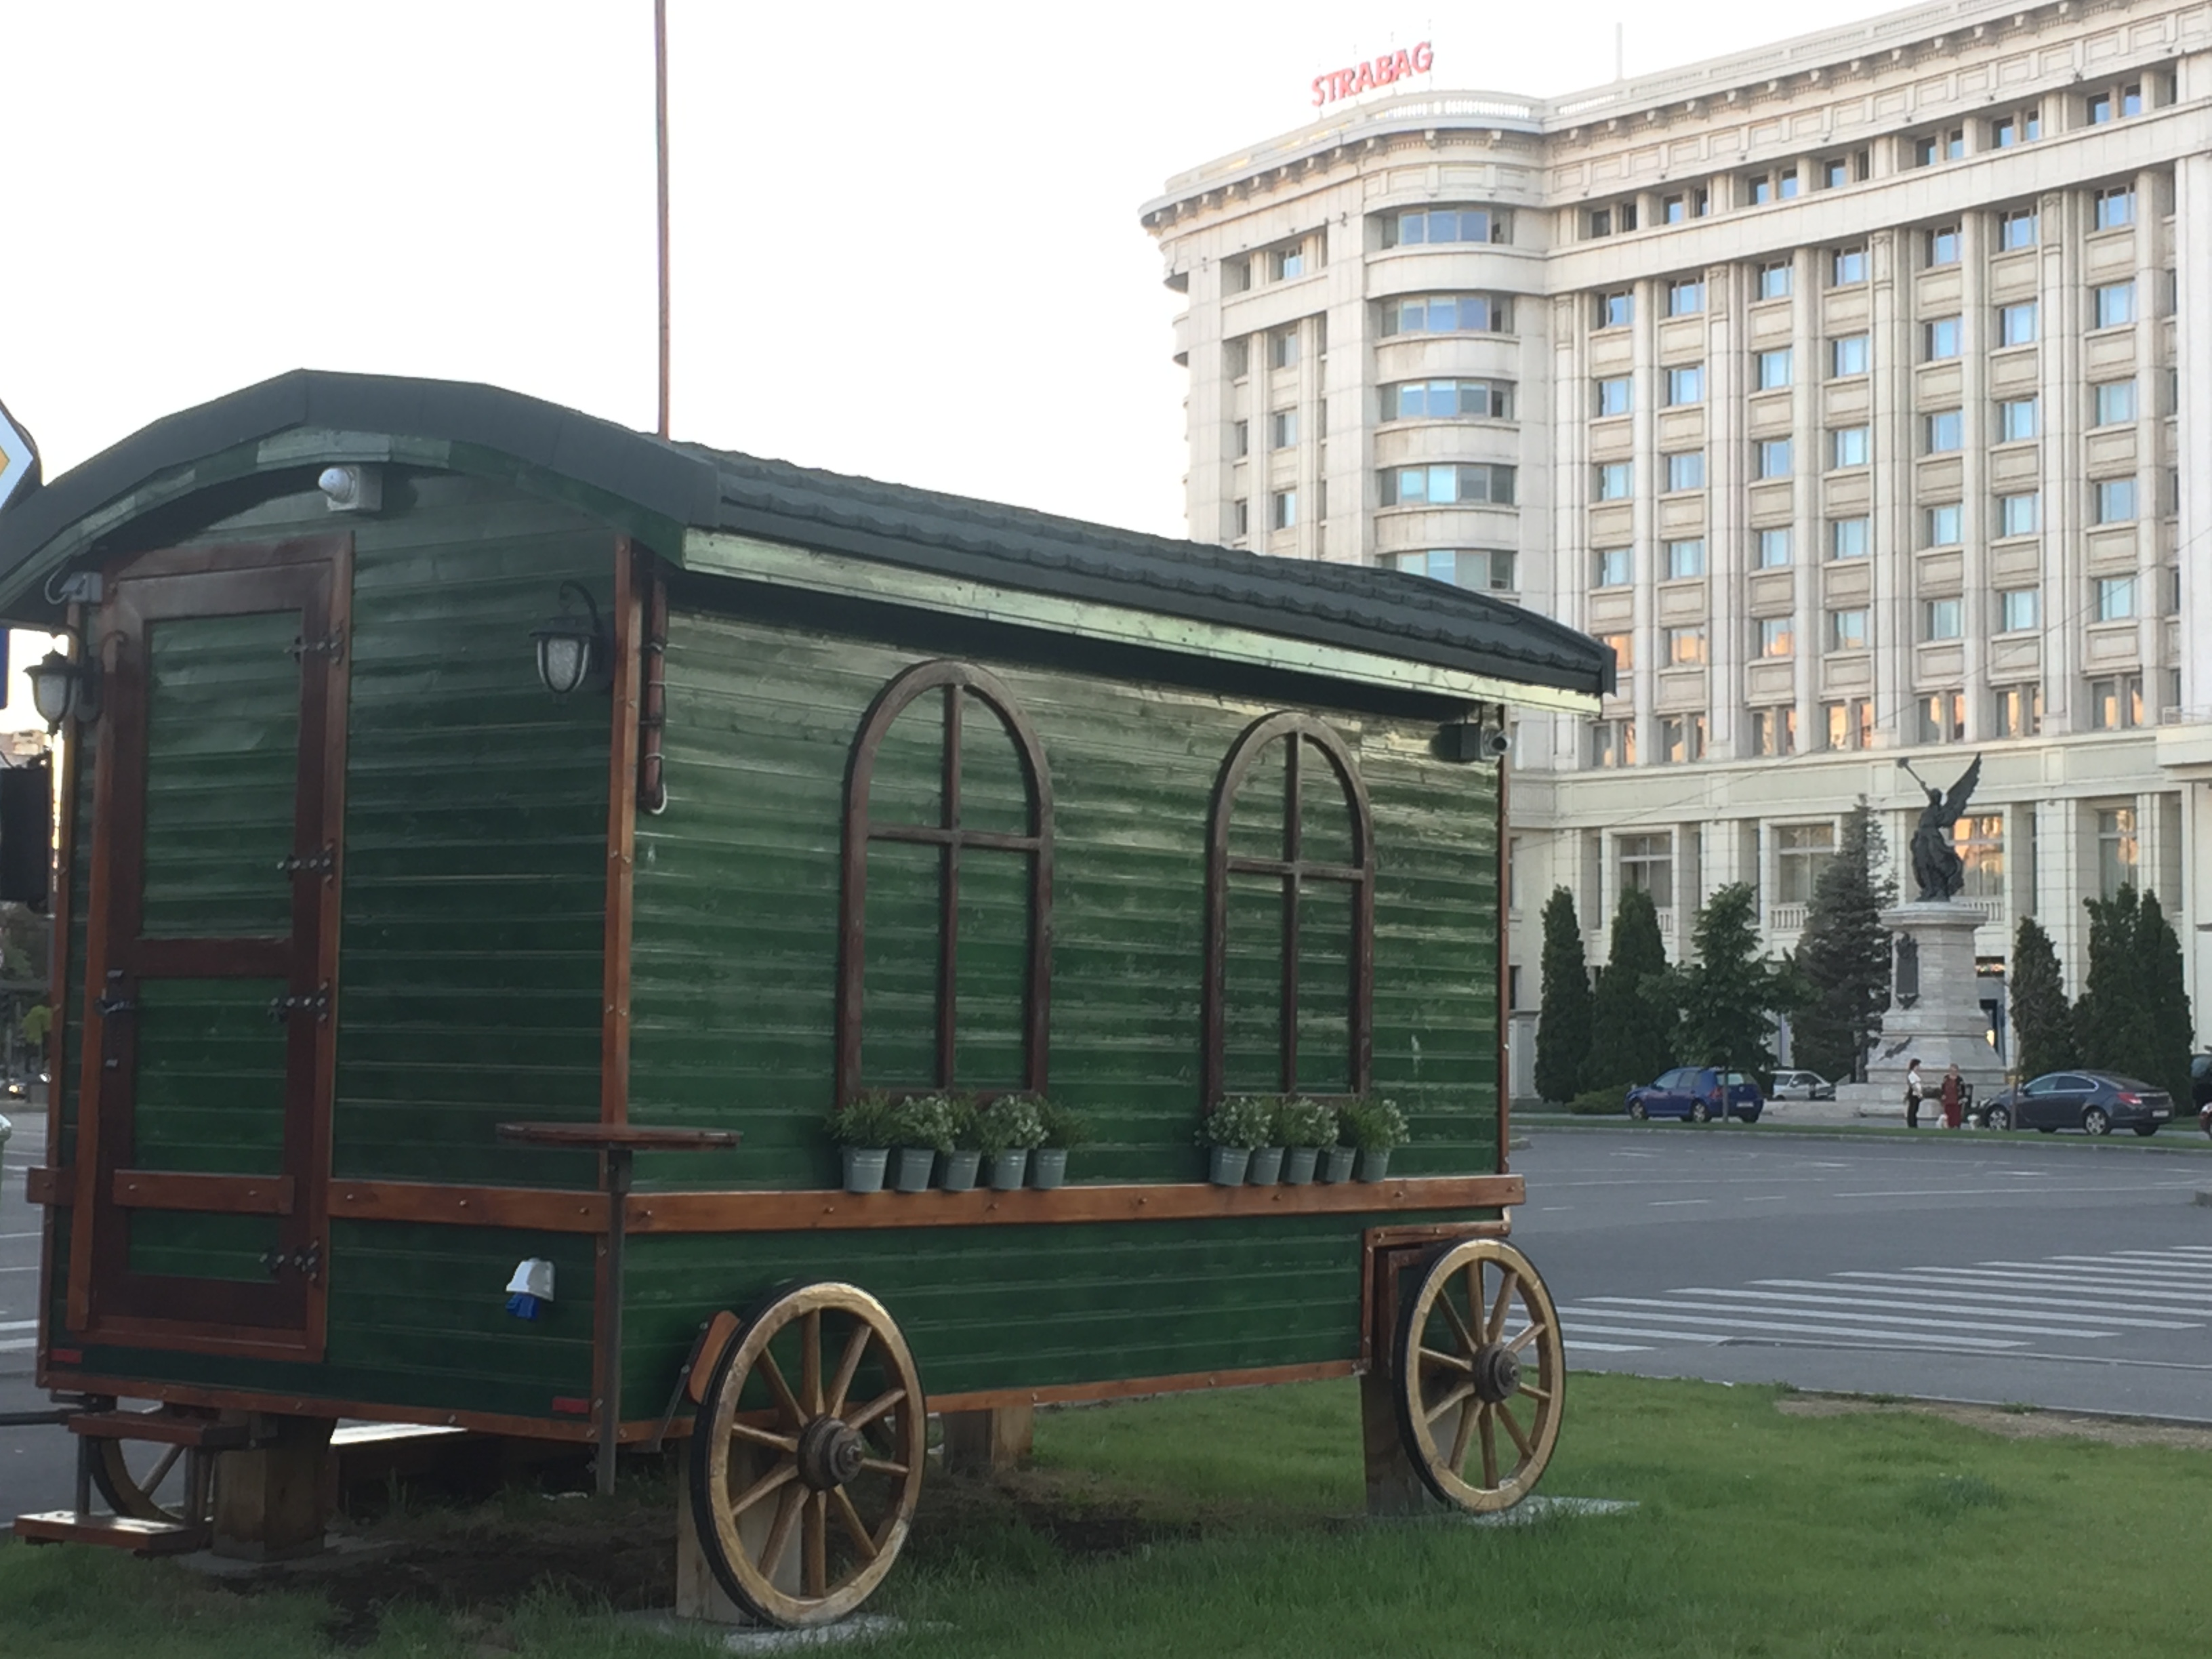 A traditional Romanian wagon close to the Parliament